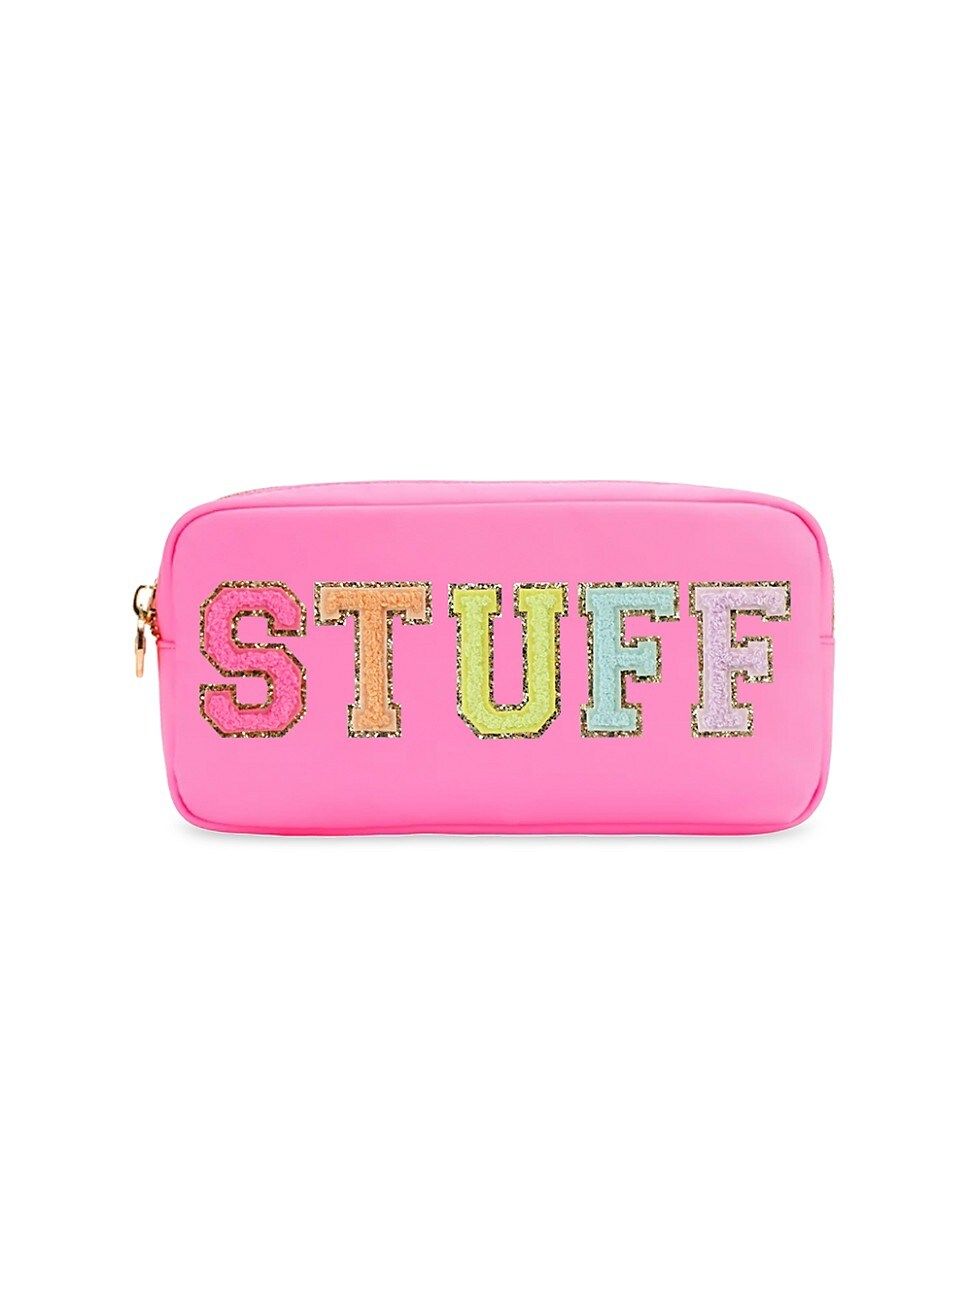 Stuff" Small Pouch | Saks Fifth Avenue